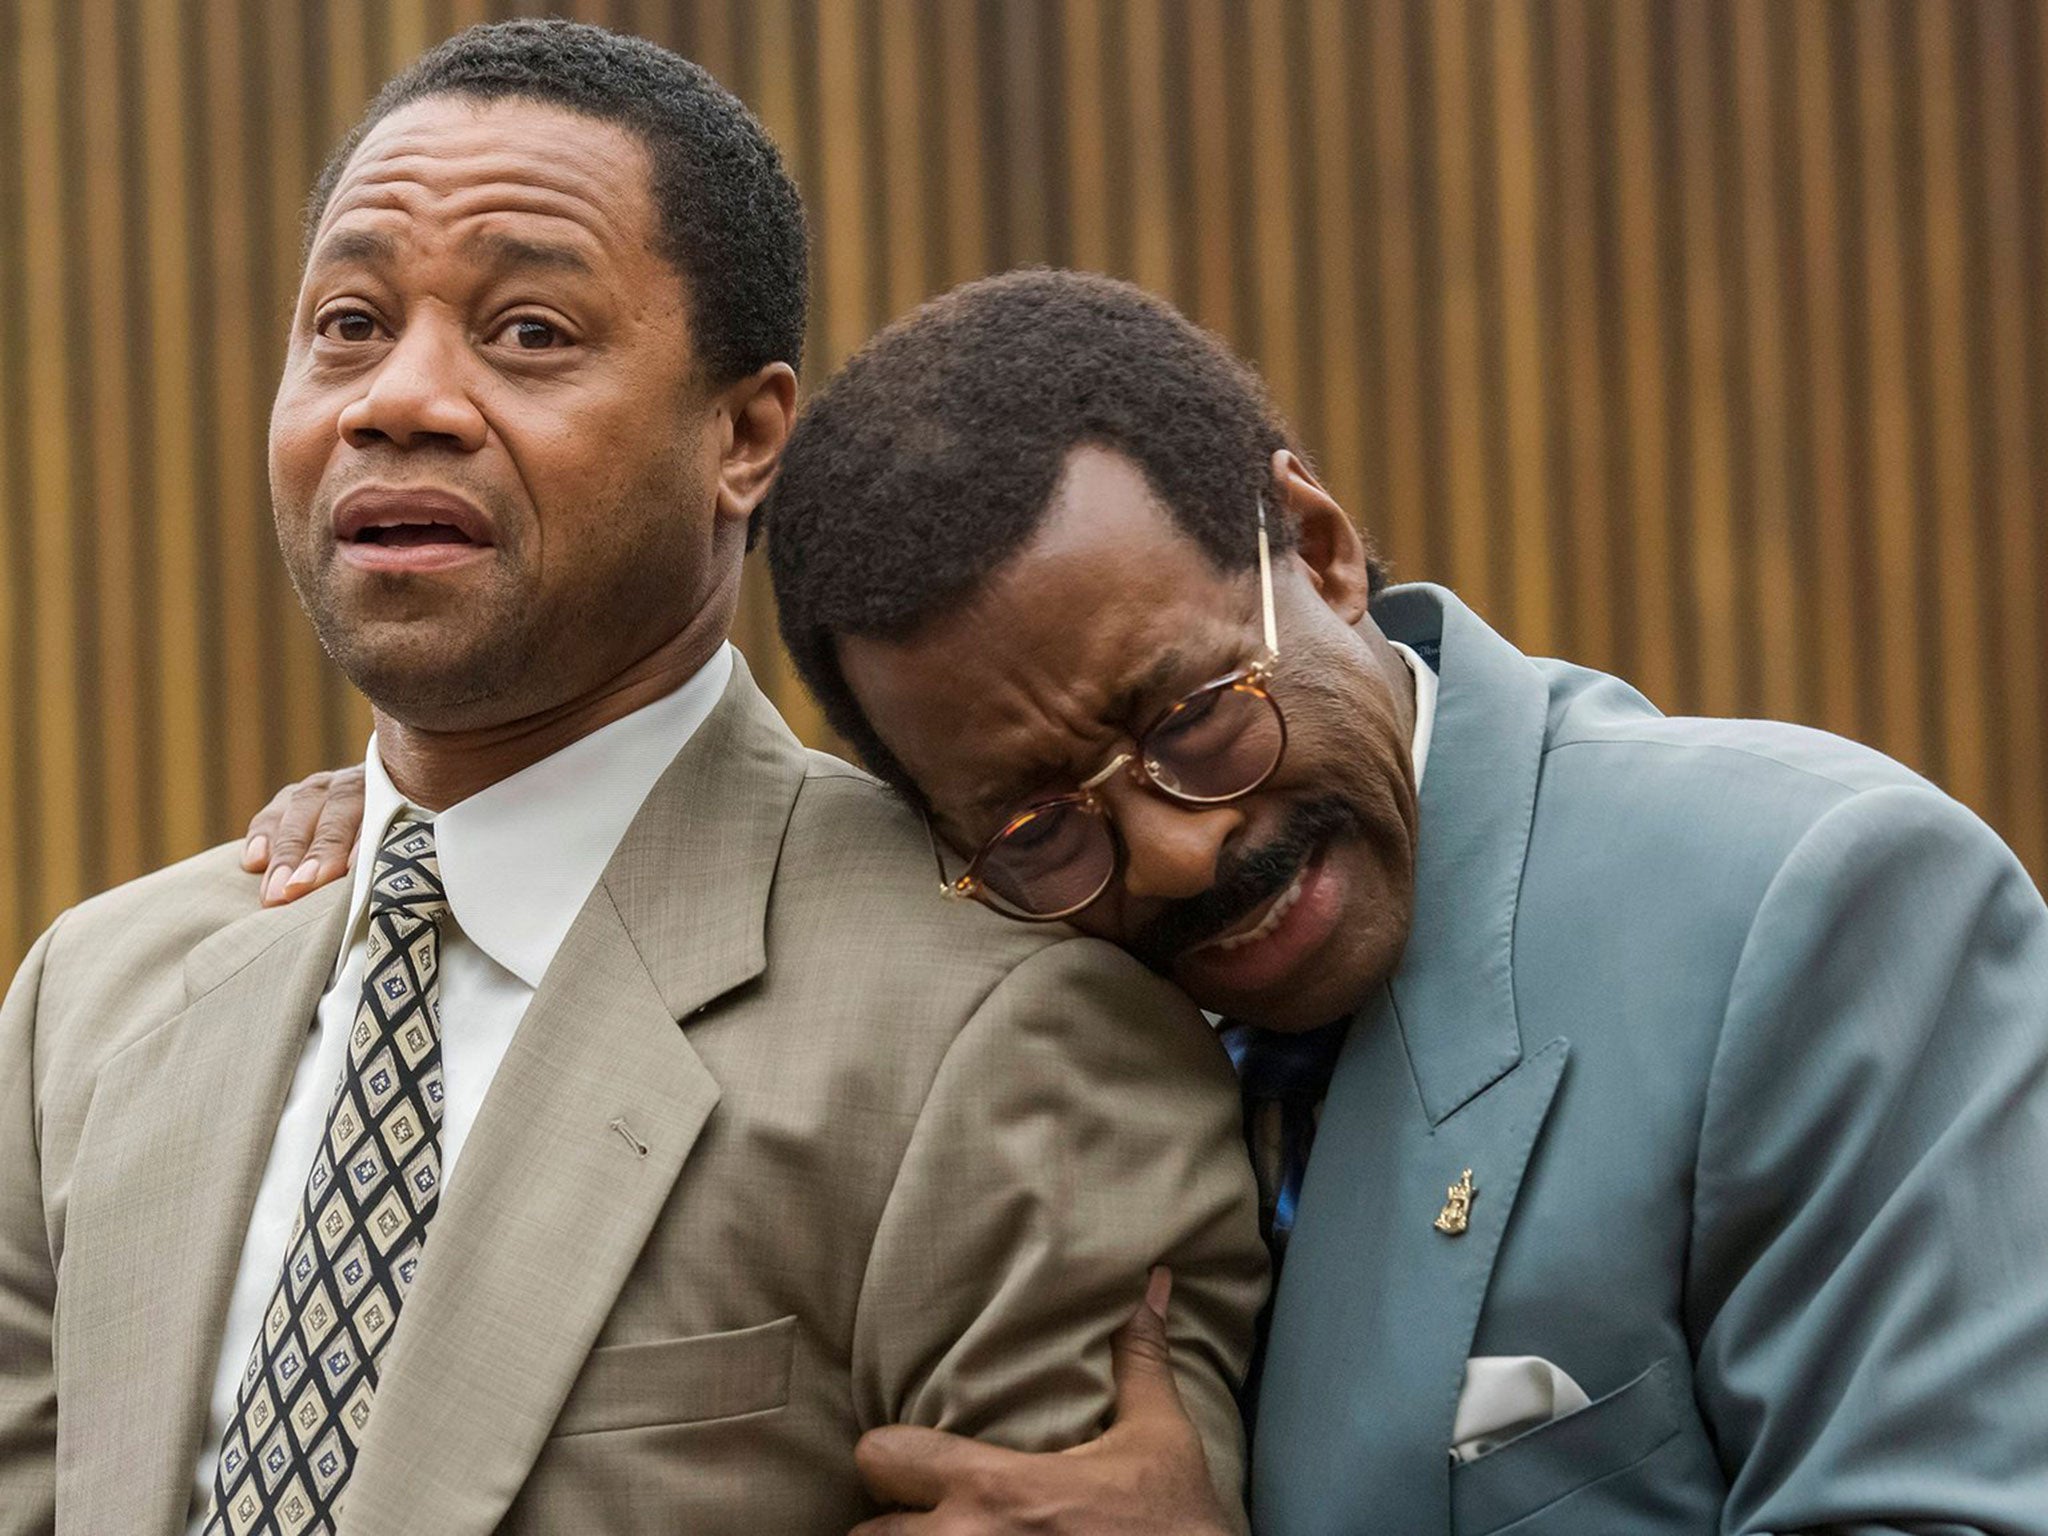 Cuba Gooding Jr and Courtney B Vance as OJ Simpson and Johnnie Cochran in The People v OJ Simpson